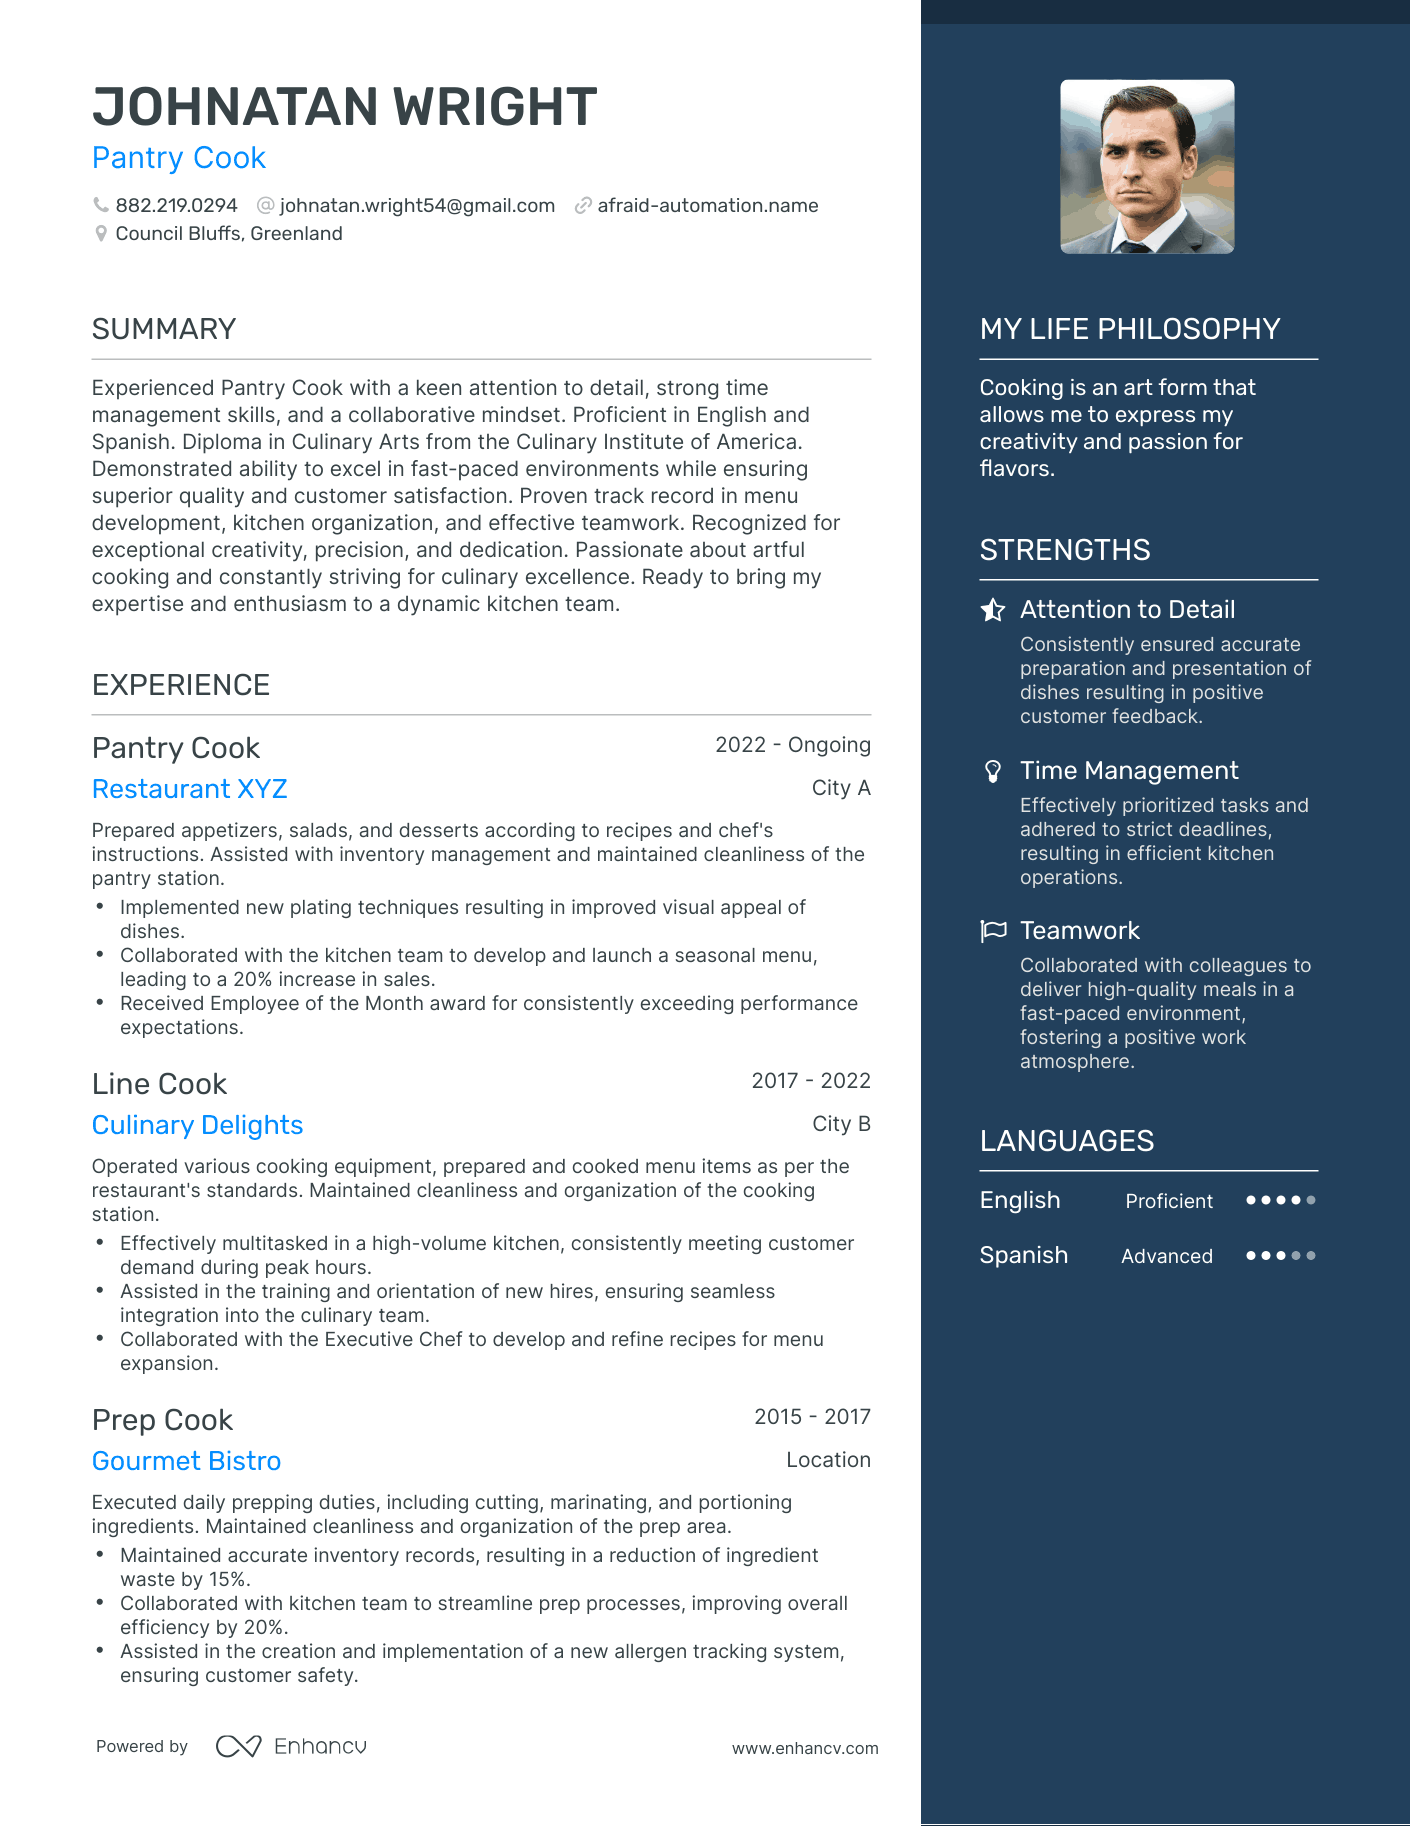 Pantry Cook resume example